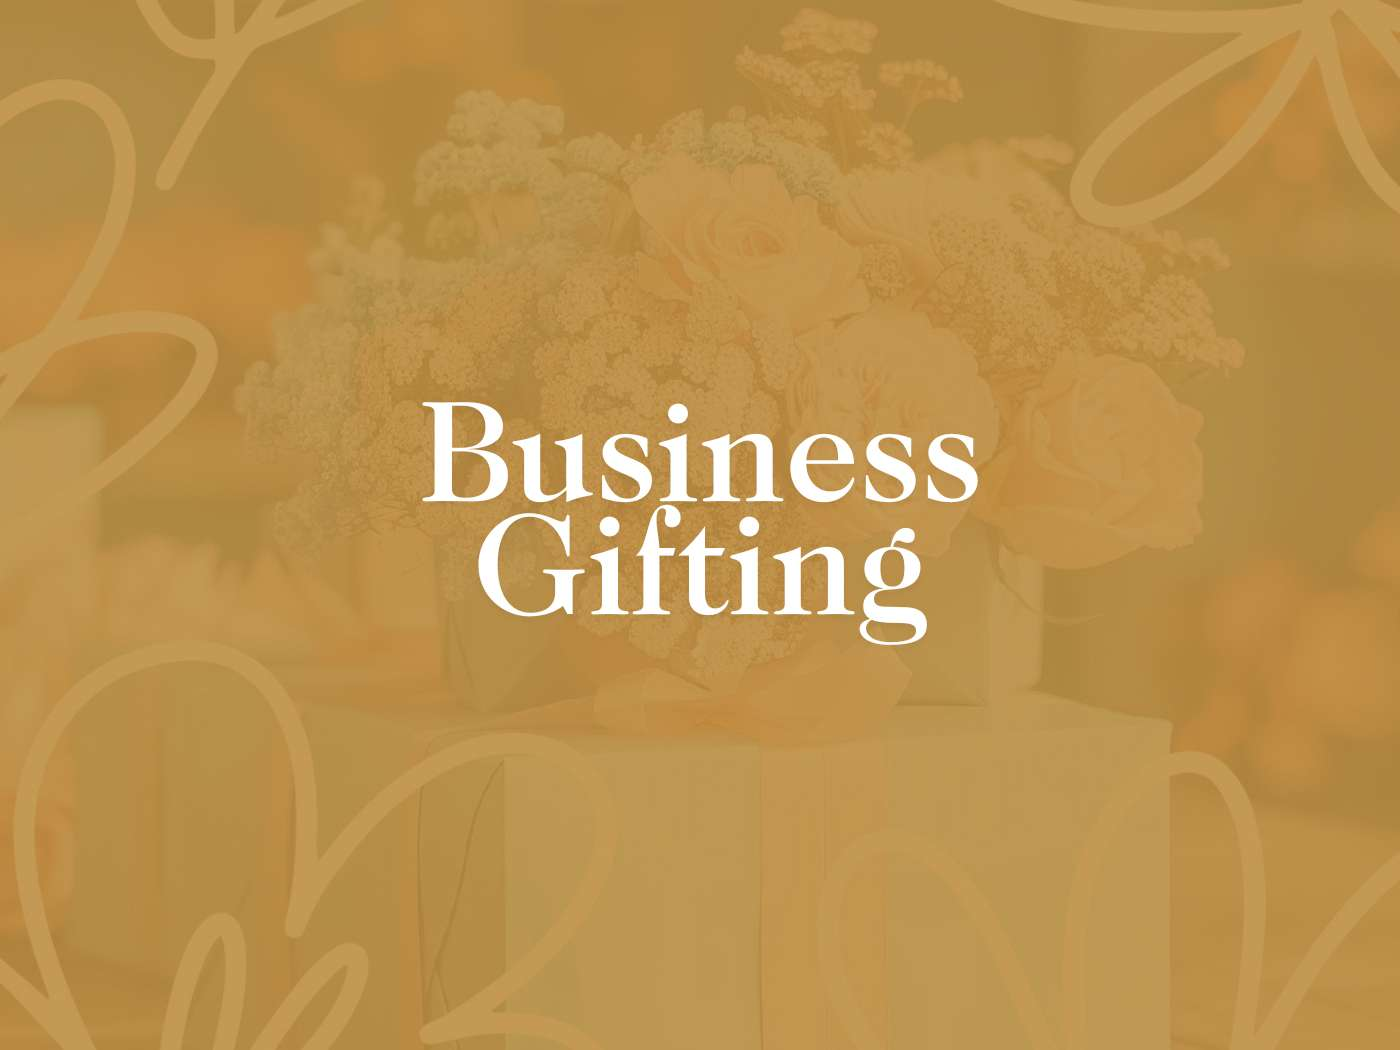 Business Gifting' prominently displayed over a soft-focus backdrop of elegant floral arrangements, encapsulating the professional gifting services offered by Fabulous Flowers and Gifts.